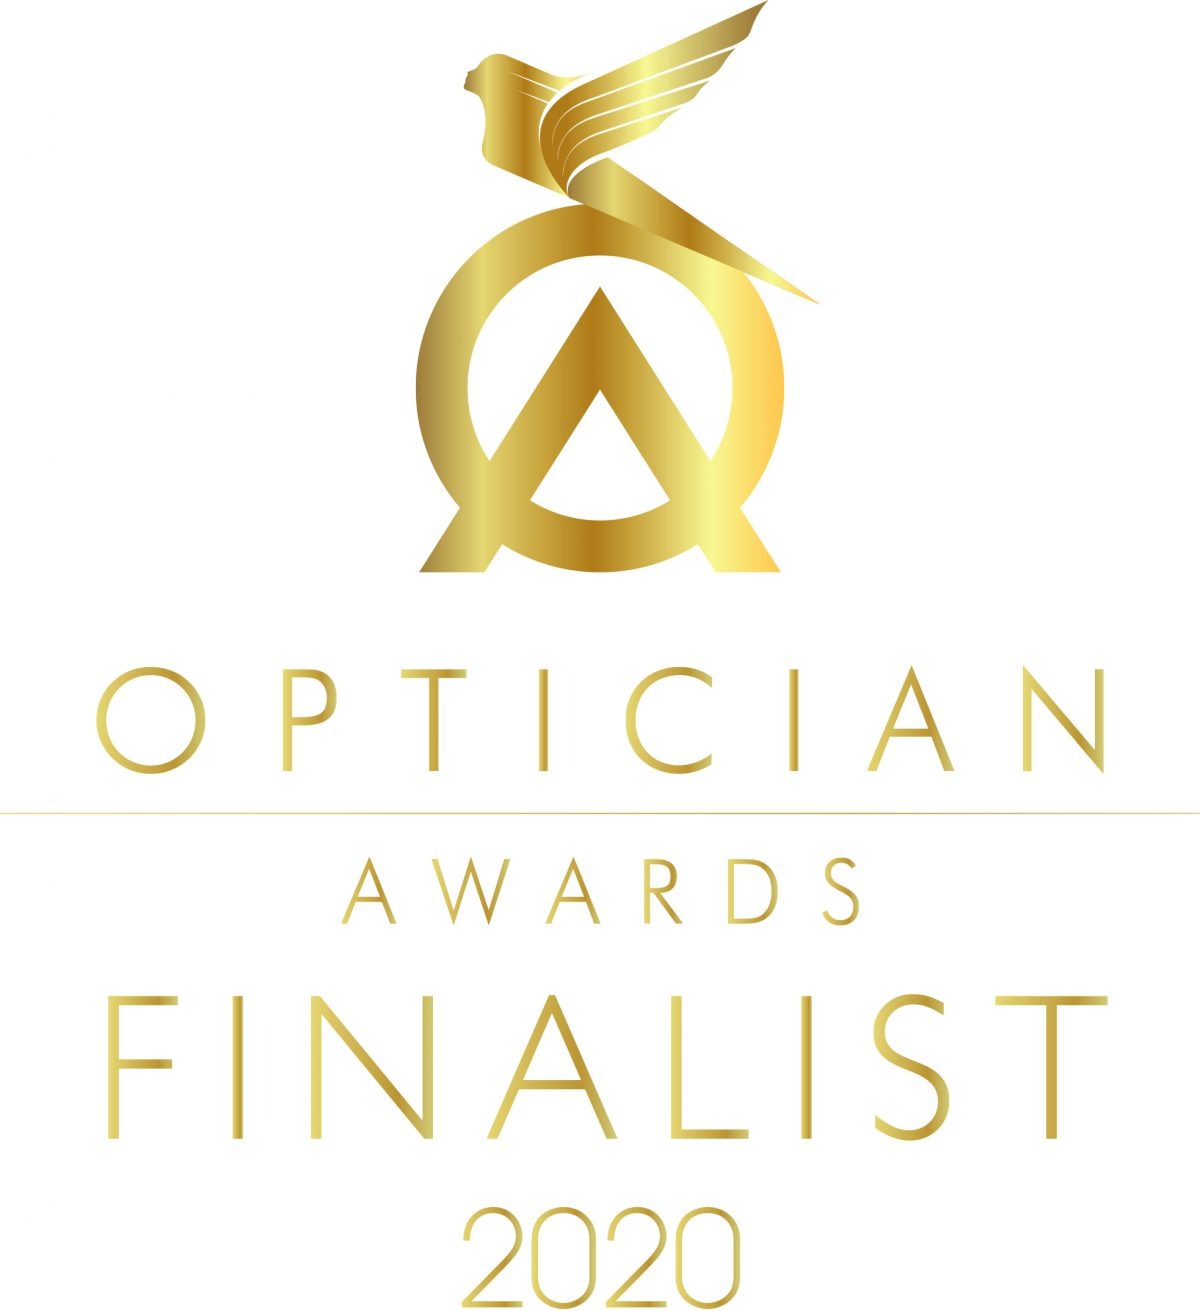 Opticians Awards Finalists in 2020